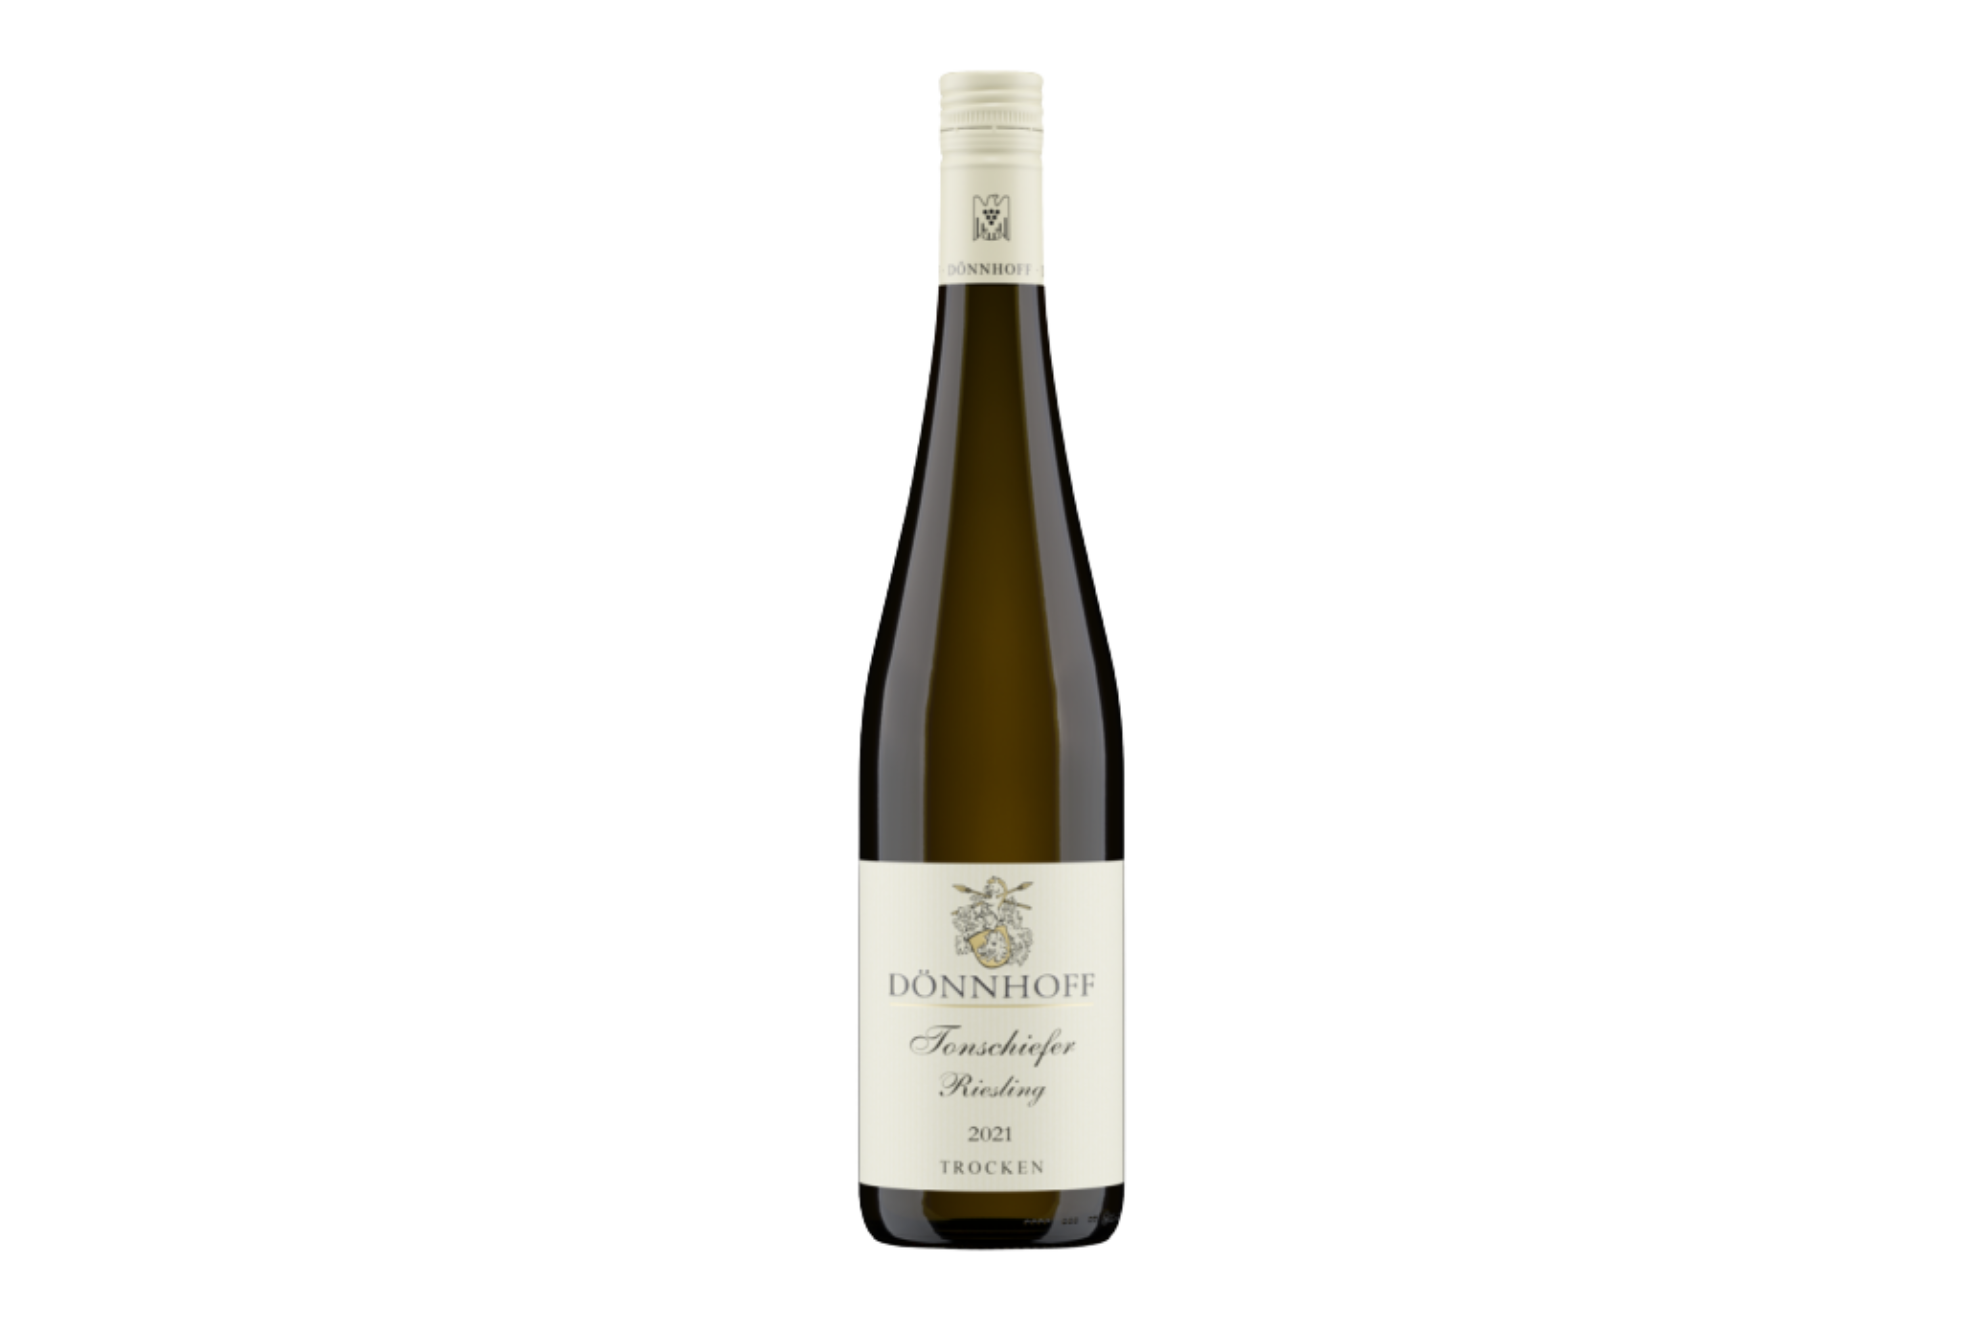 Donnhoff Tonschiefer Riesling Dry Slate 2021